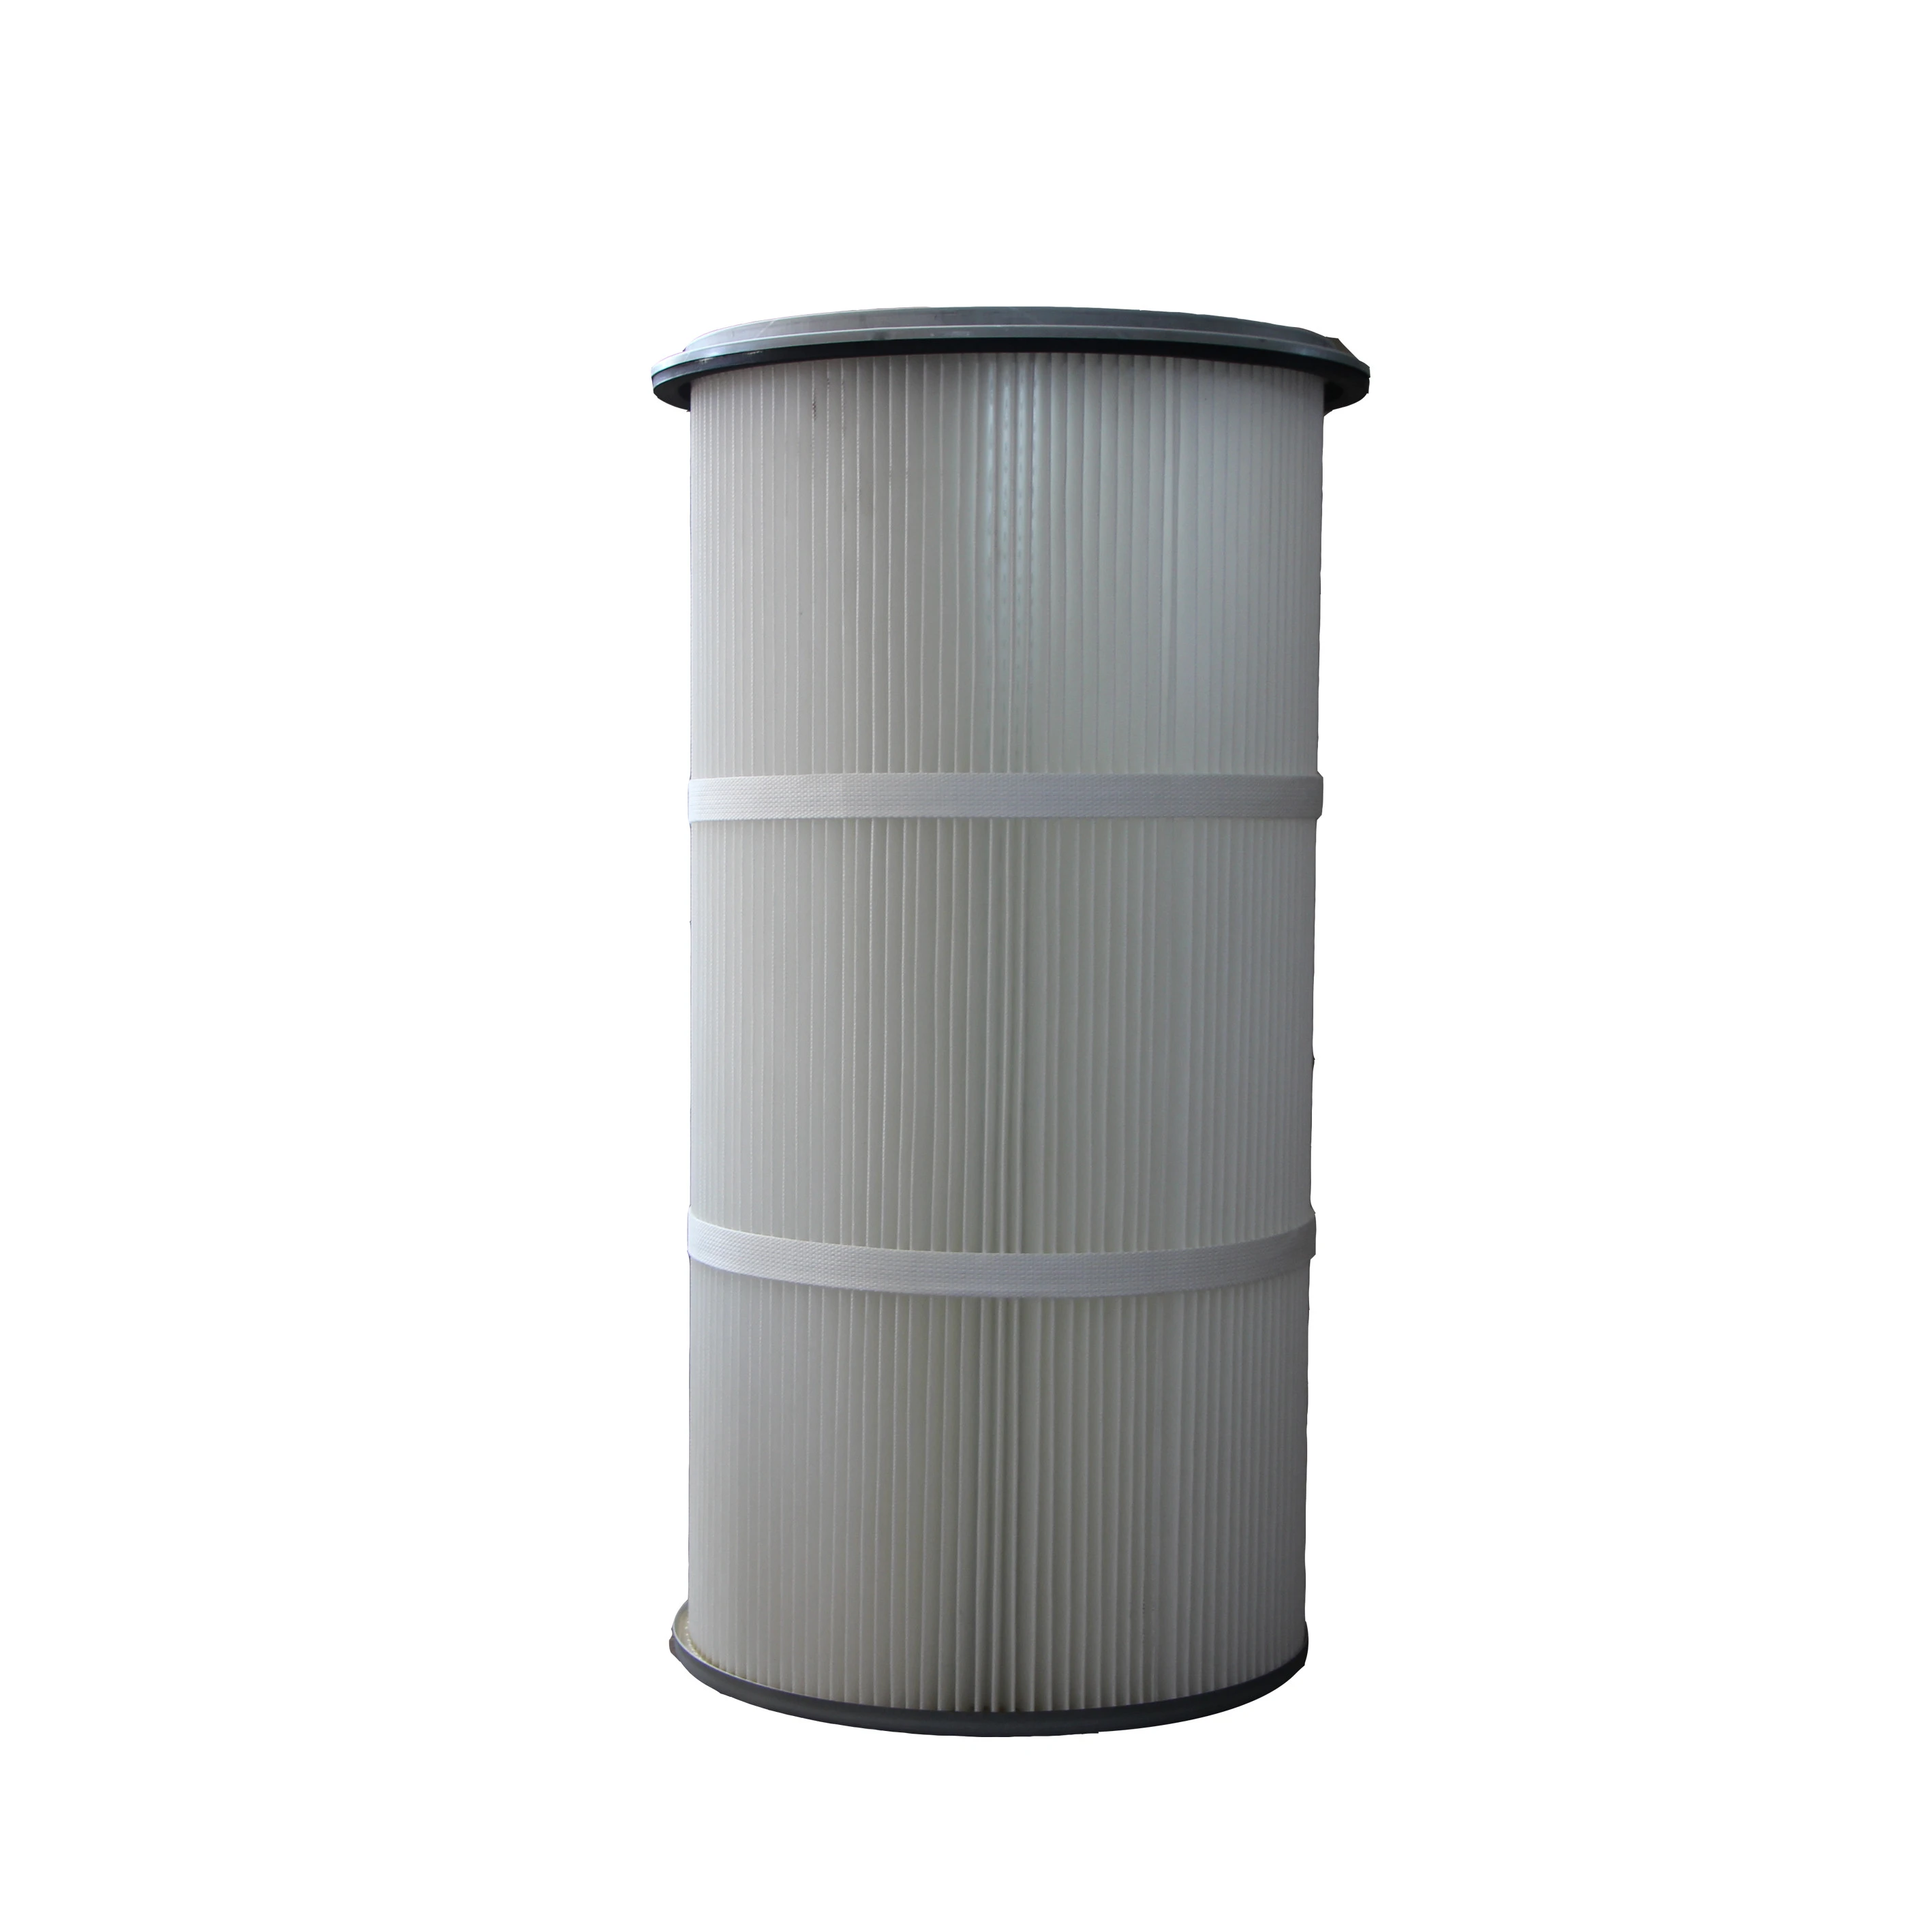 High efficiency polyester dust pleated air cartridge filter